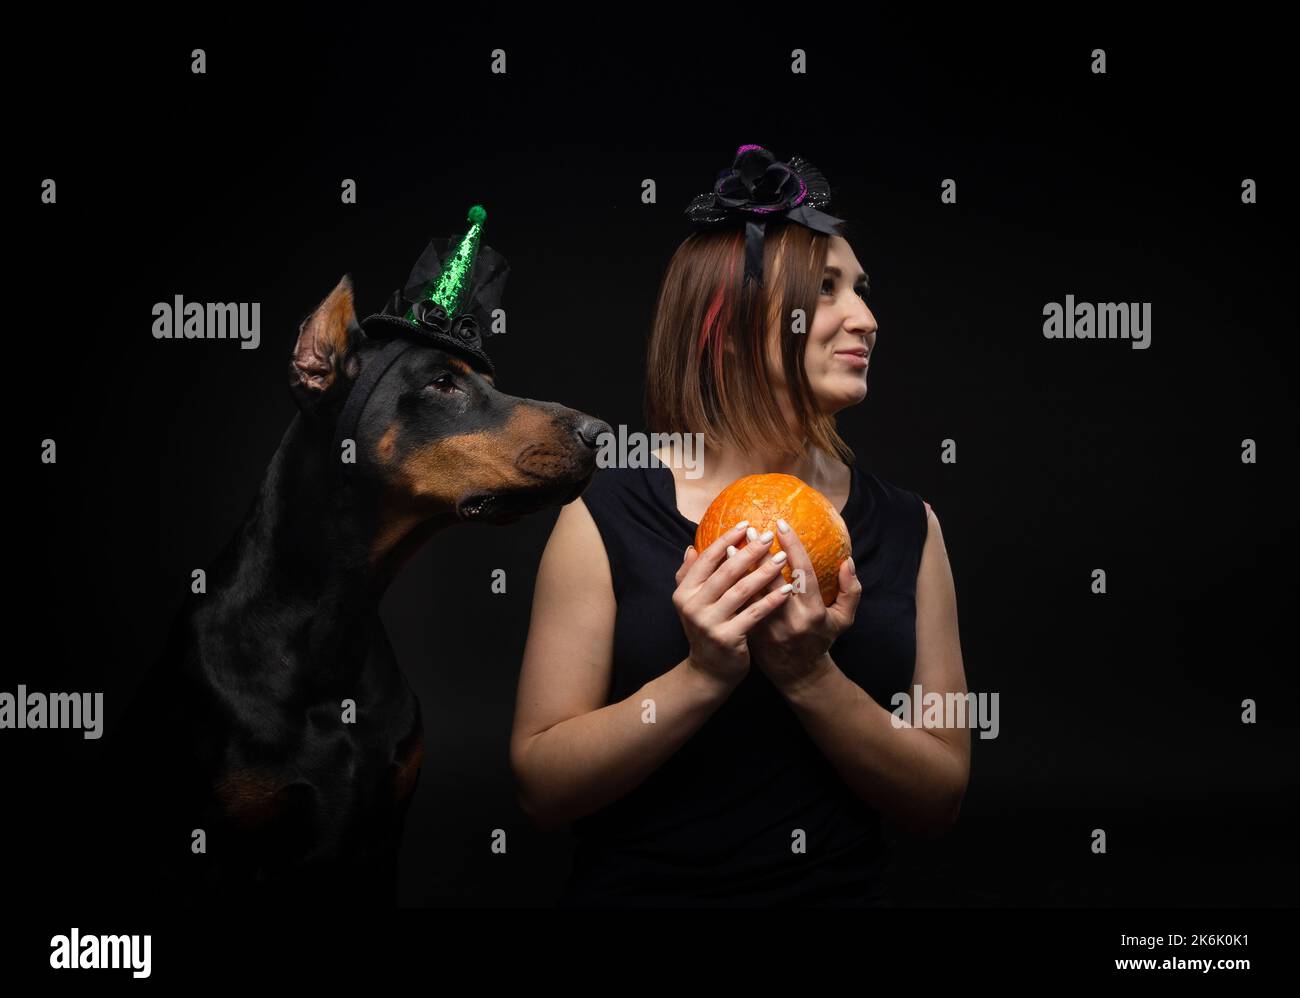 Portrait of a Doberman dog with a girl owner. In carnival costumes with a pumpkin. Isolated Studio photo on a black background. Stock Photo